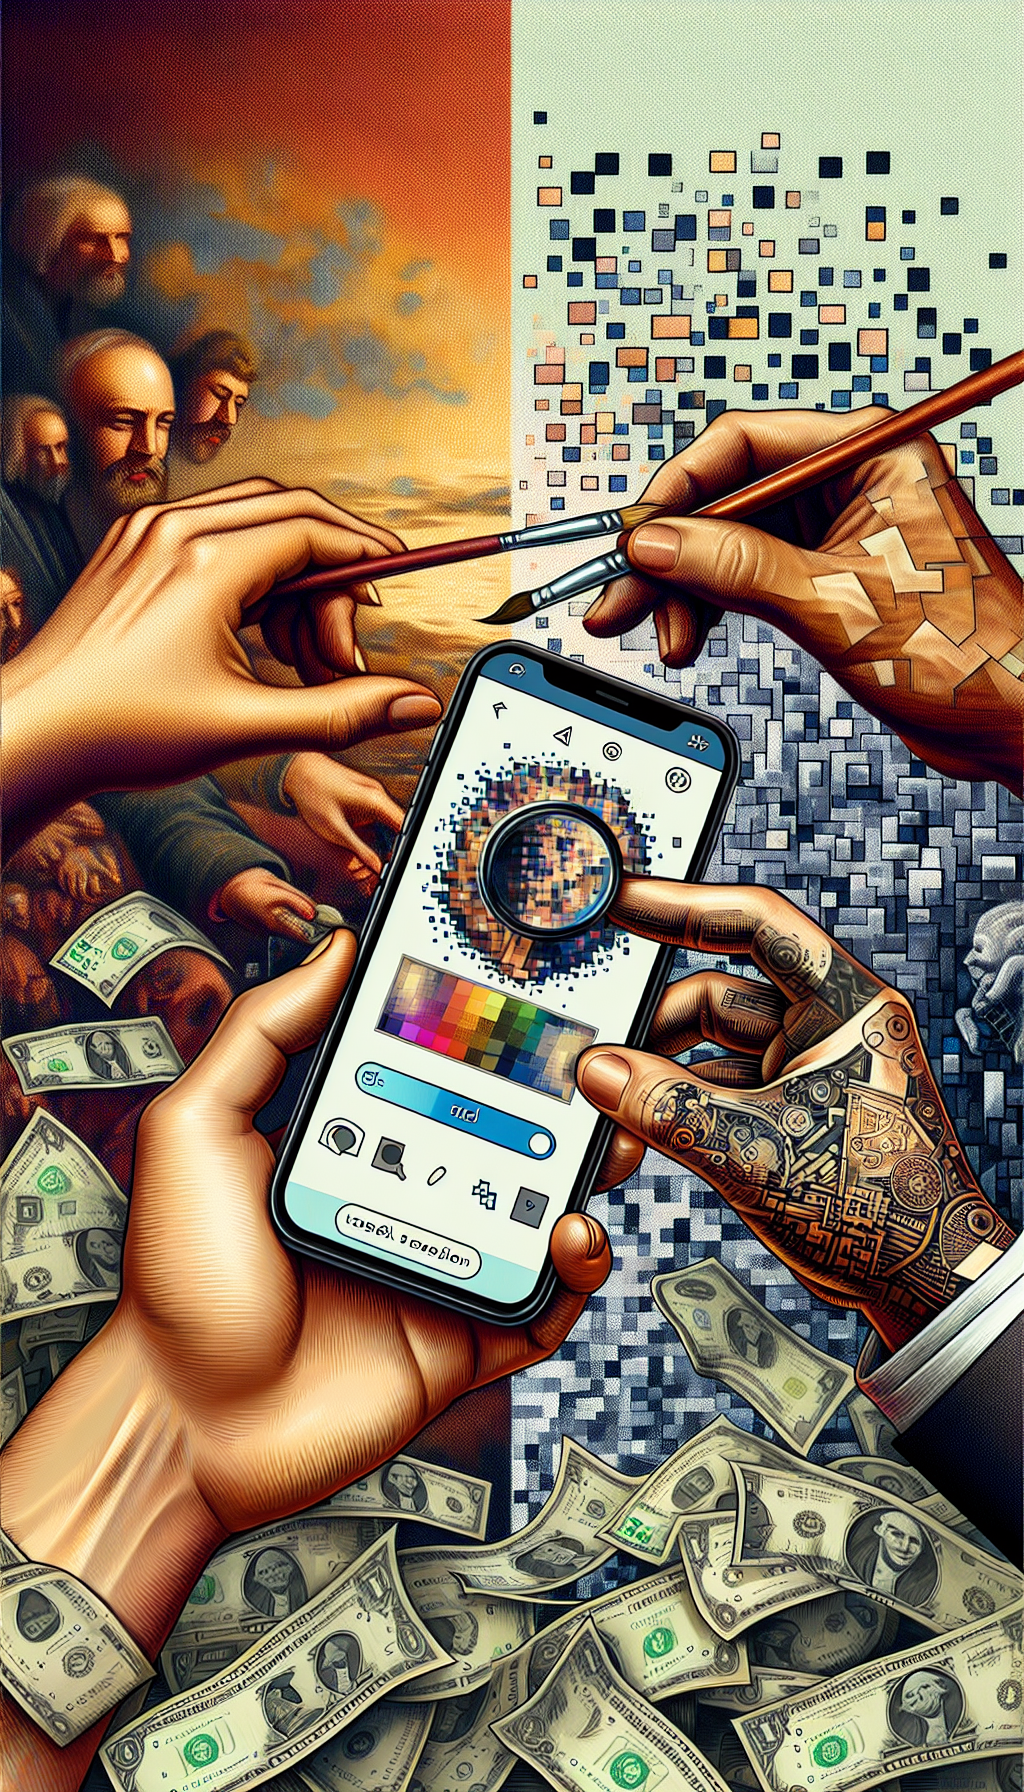 An image split into three sections with distinct style transitions: at the left, a painter's hand puts the final stroke on a canvas, the middle morphs into pixelation representing digital appraisal transformation, and the right shows a smartphone displaying the app's value estimation amidst scattered banknotes, with the app icon featuring a magnifying glass over a painting to symbolize the art valuation process.